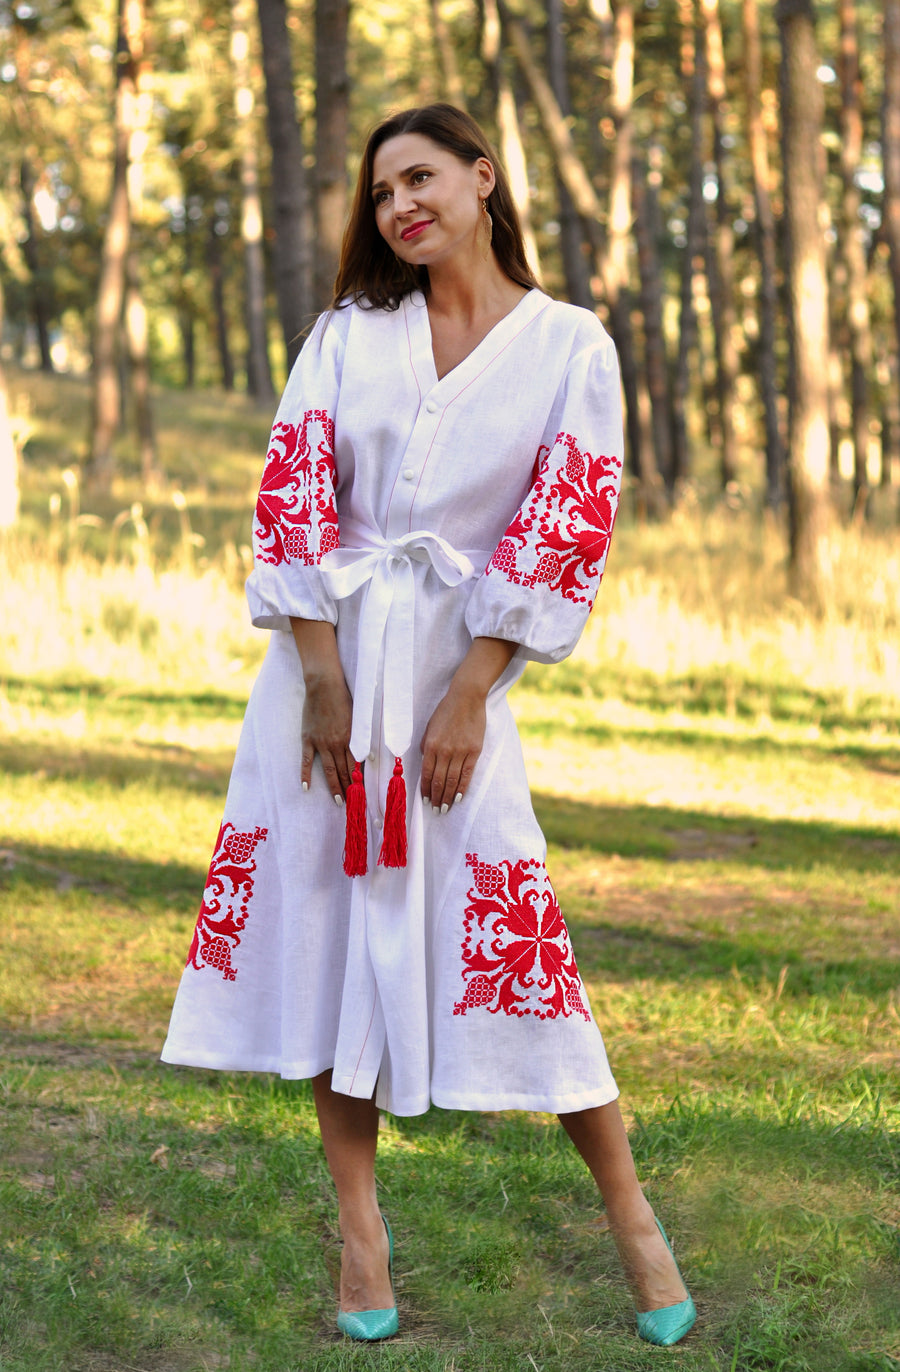 Robe dress made of natural white linen with red embroidery